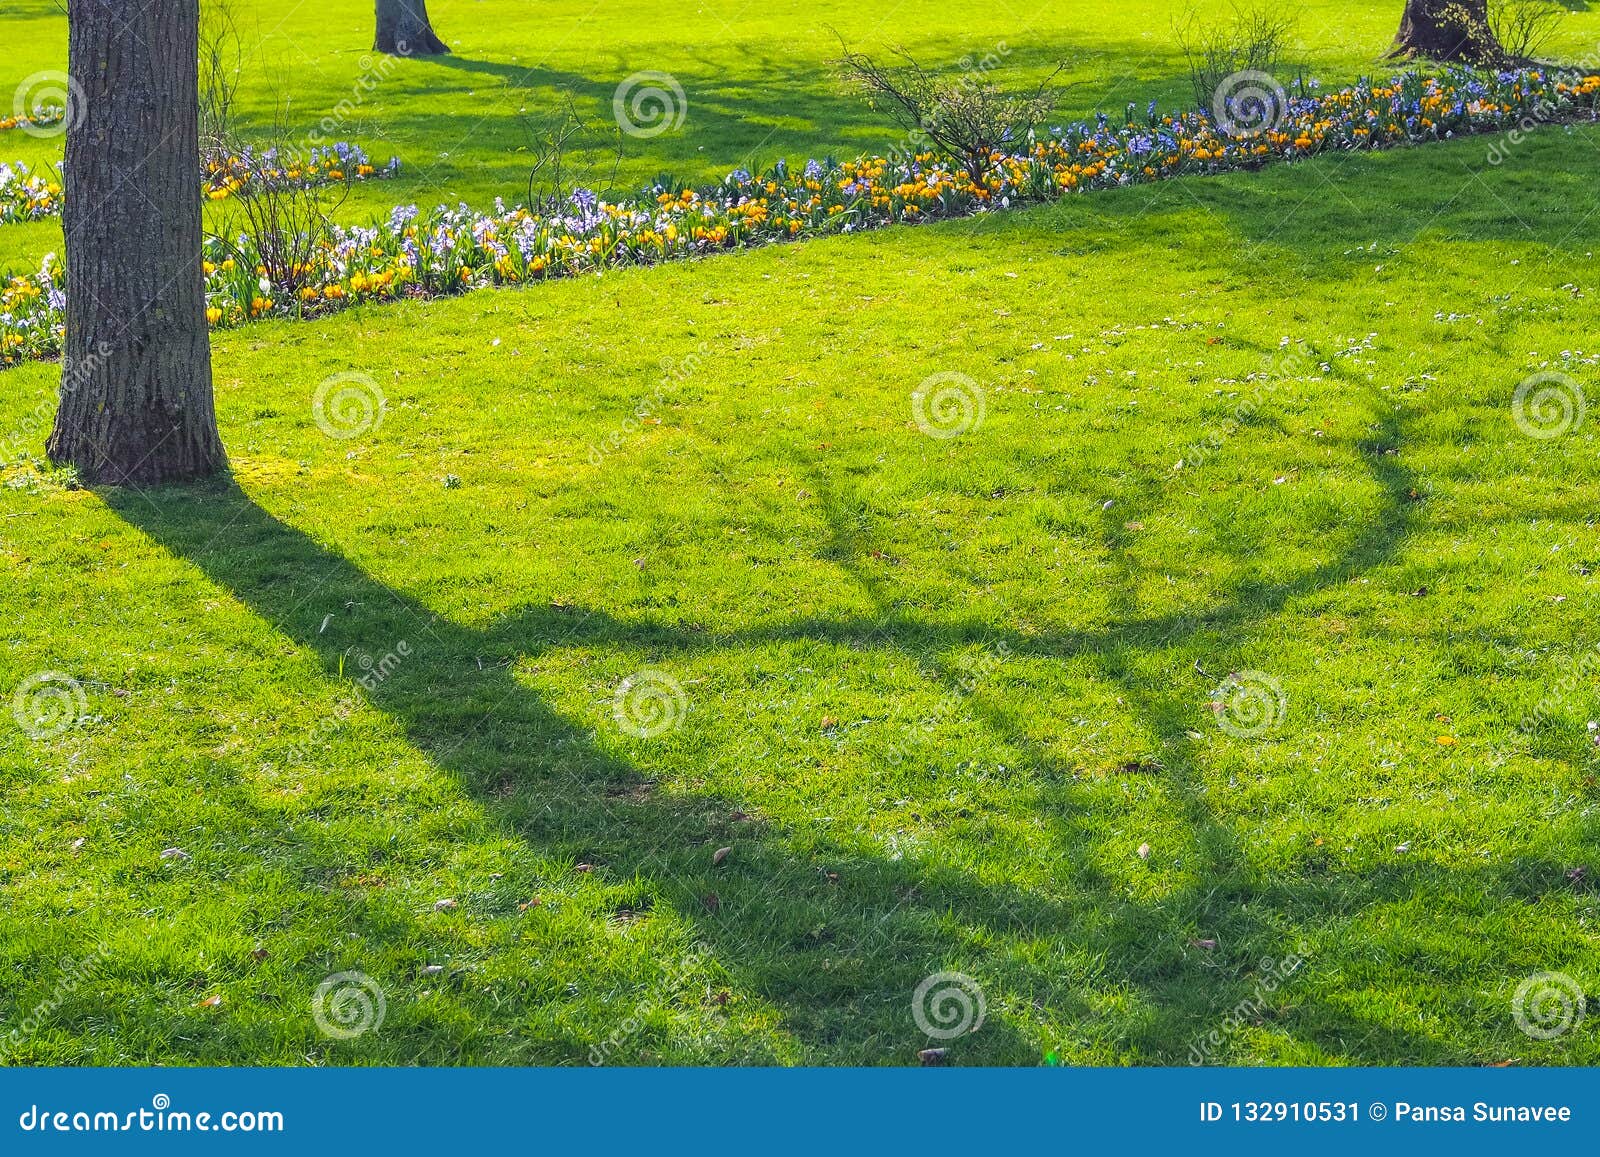 Tree shadow on green grass stock image. Image of nature - 132910531